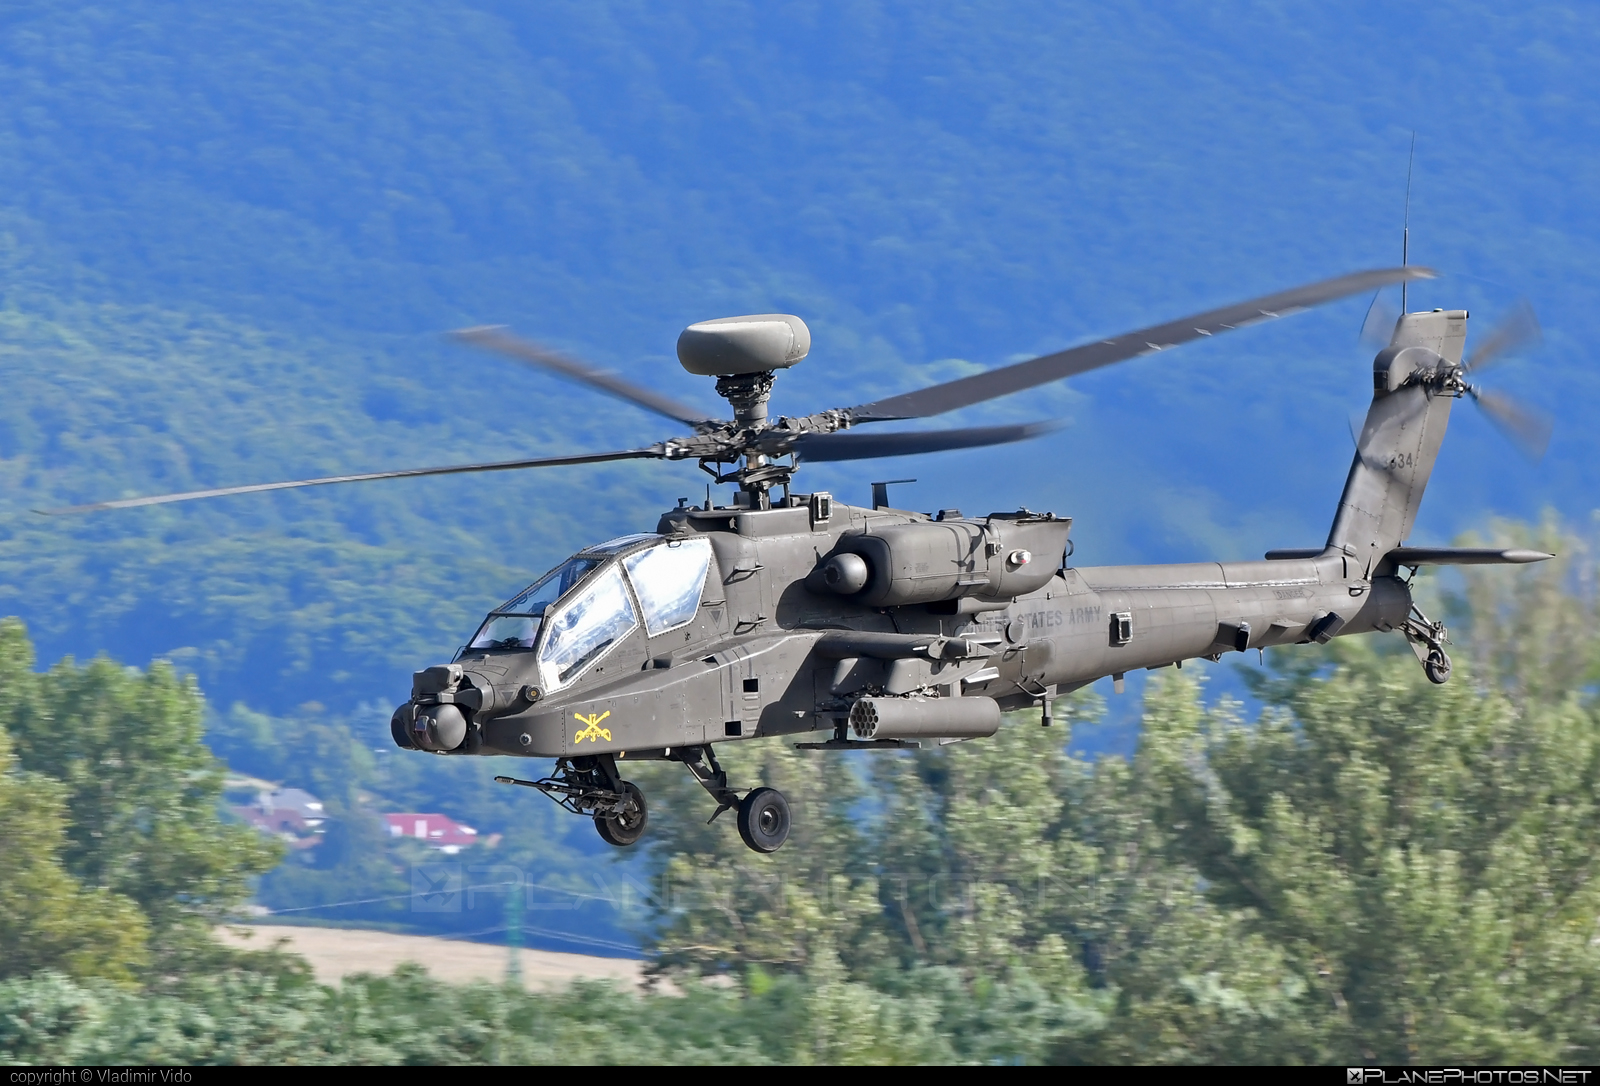 Boeing AH-64E Apache Guardian - 20-03334 operated by US Army #ah64 #ah64apache #ah64e #ah64eapache #ah64eapacheguardian #apacheguardian #boeing #usarmy